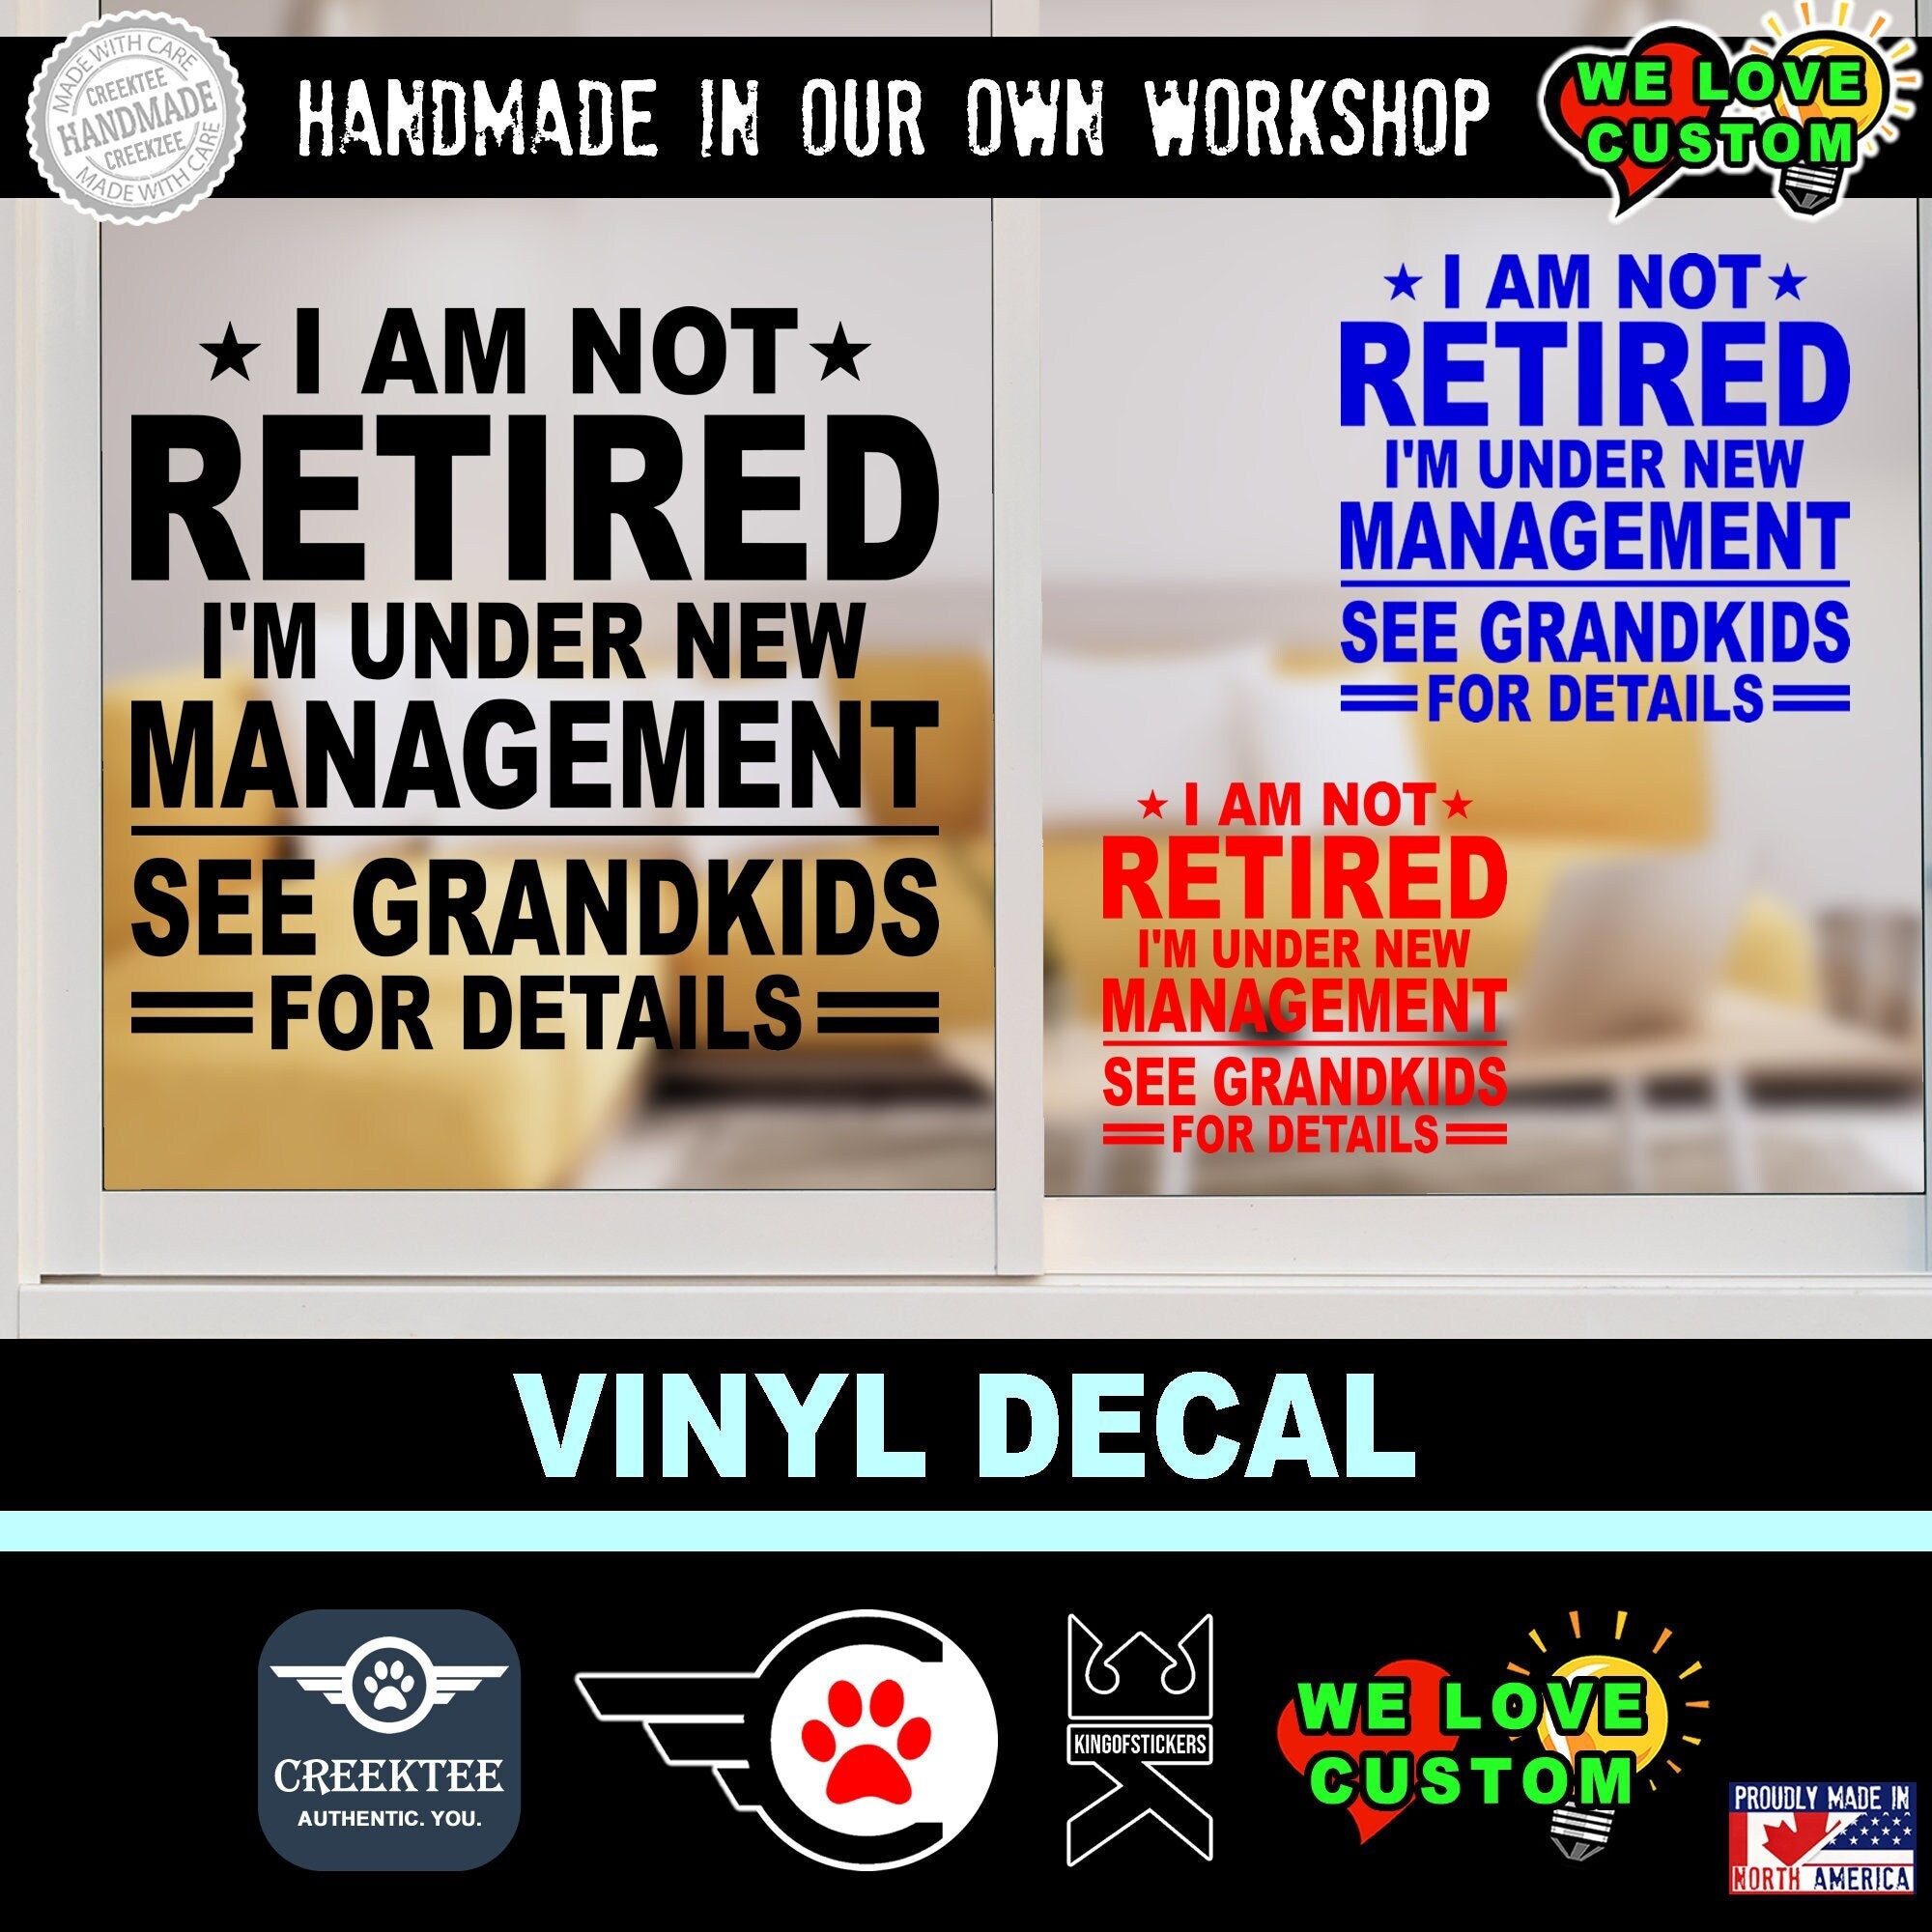 I Am Not Retired I'm Under New Management See Grandkids For Details Vinyl Decal in various sizes and colors